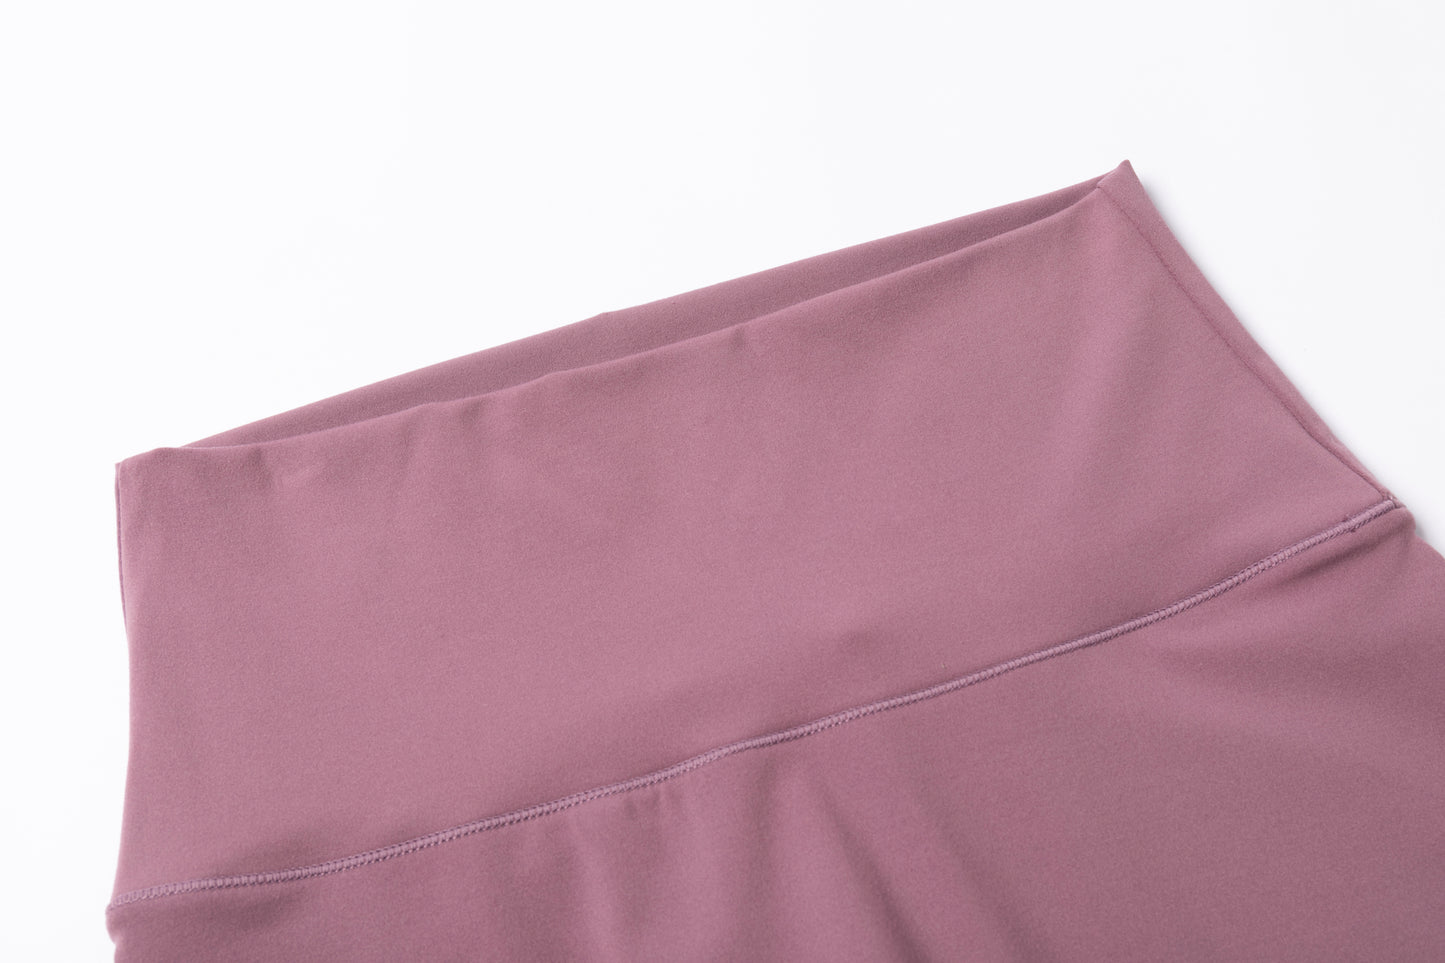 B.Reactive Tight Cropped Length - French Lavender